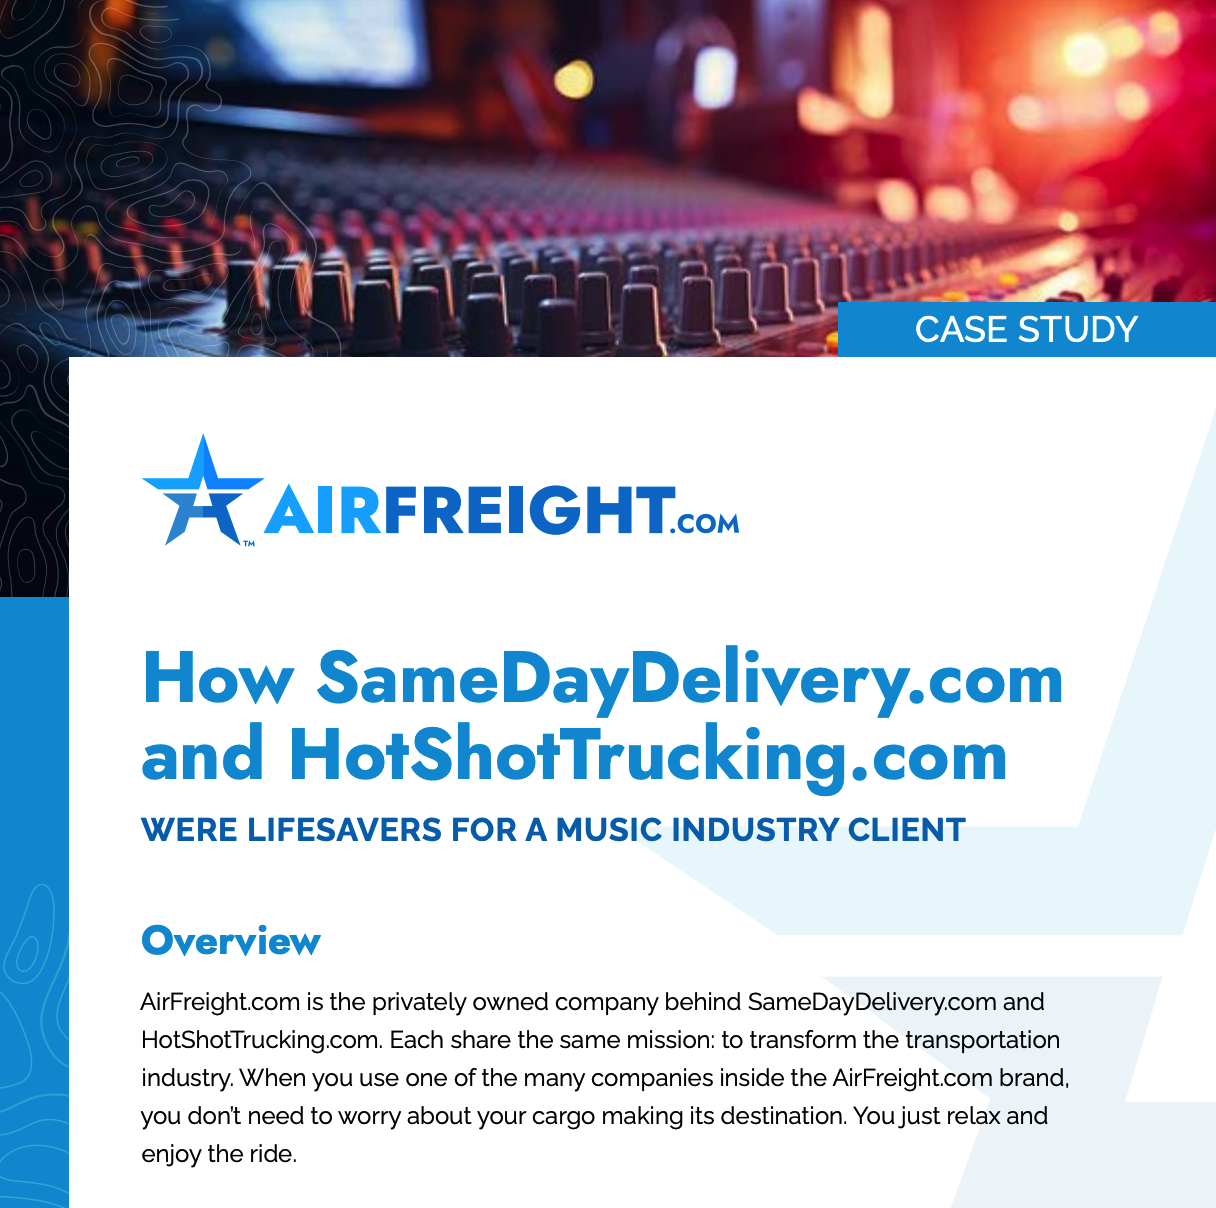 How SameDayDelivery.com and HotShotTrucking.com Were Lifesavers For a Music Industry Client